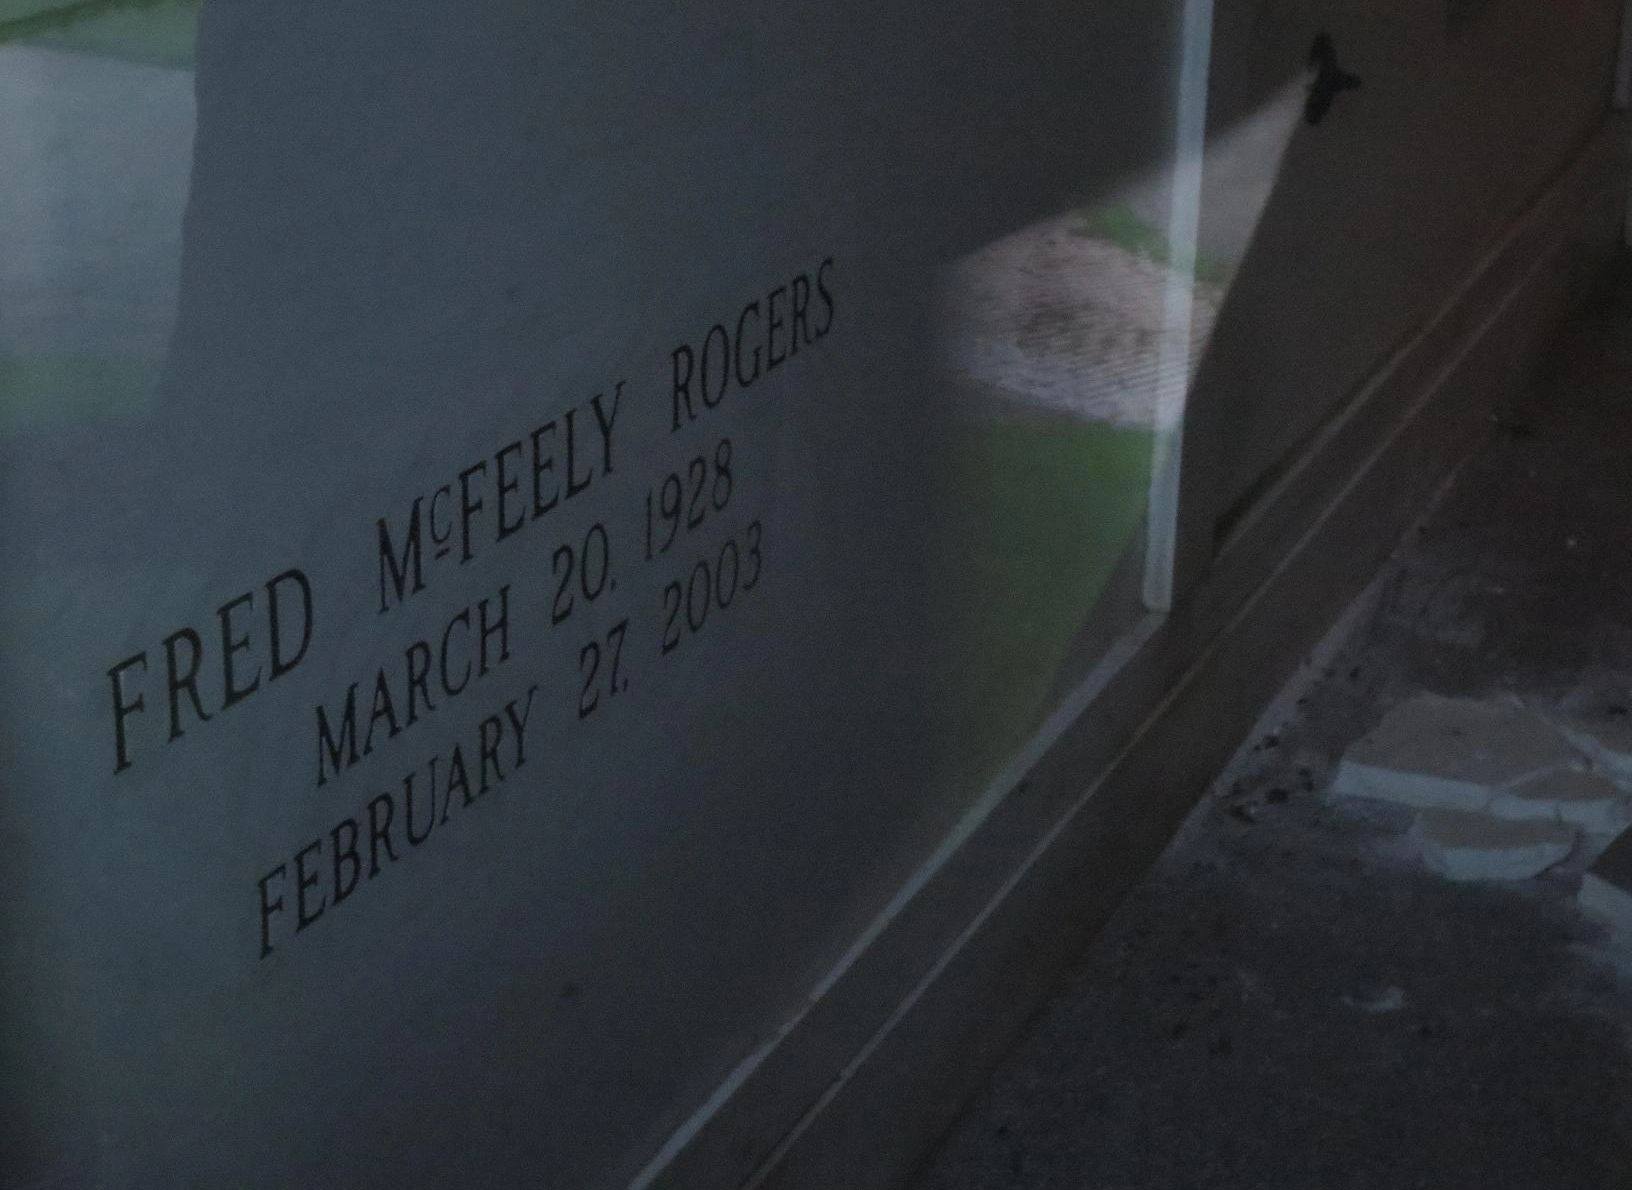 fred mcfeely rogers grave